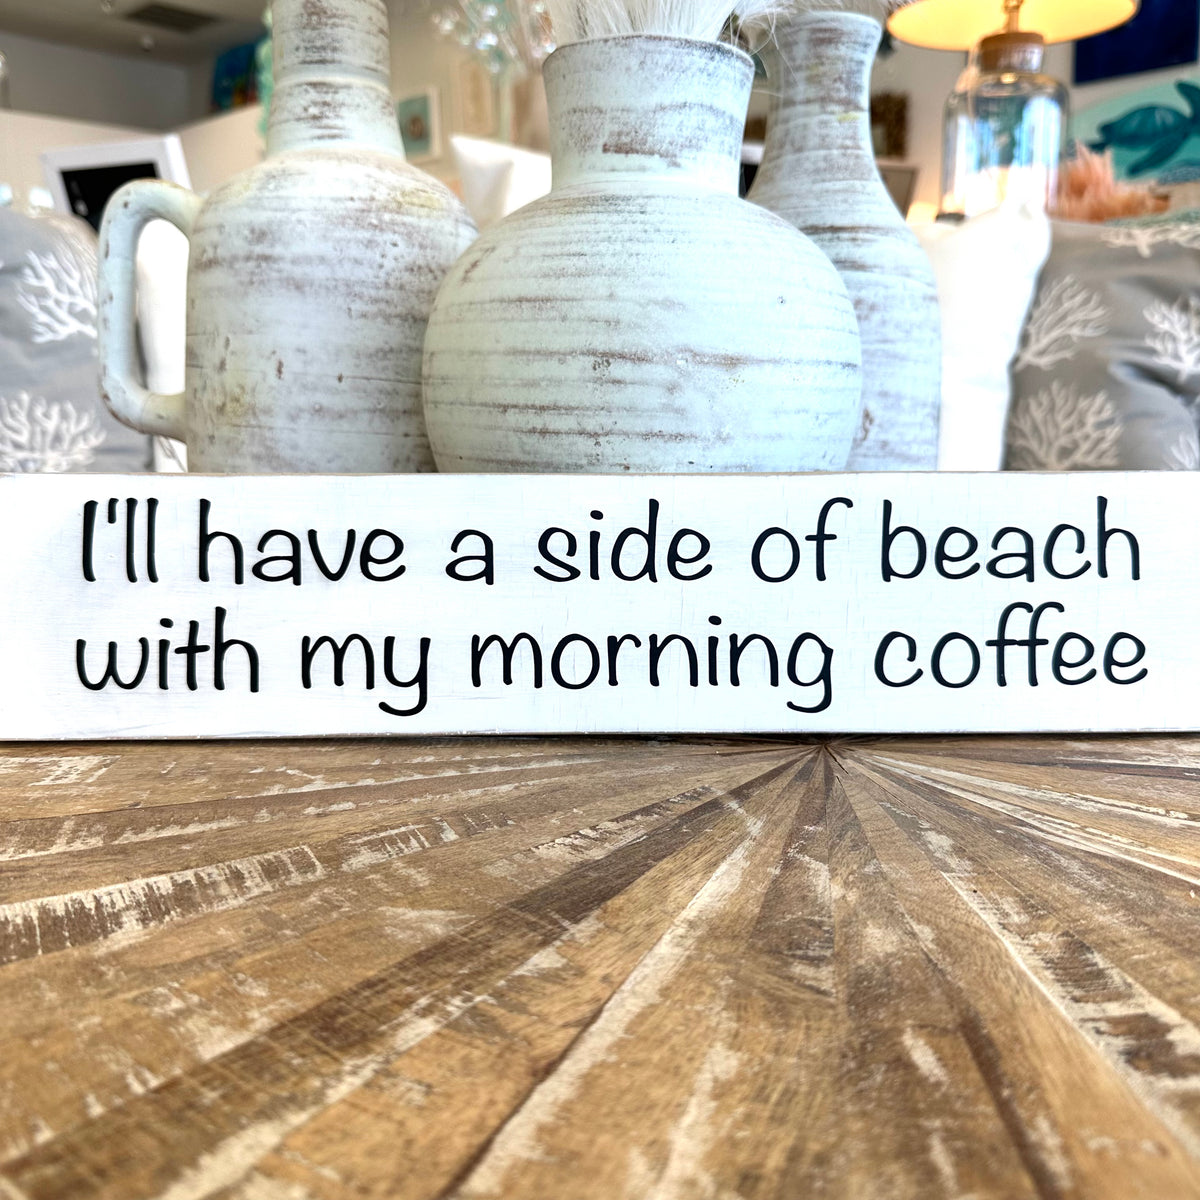 "I'll have a side of beach with my morning coffee" wooden sign